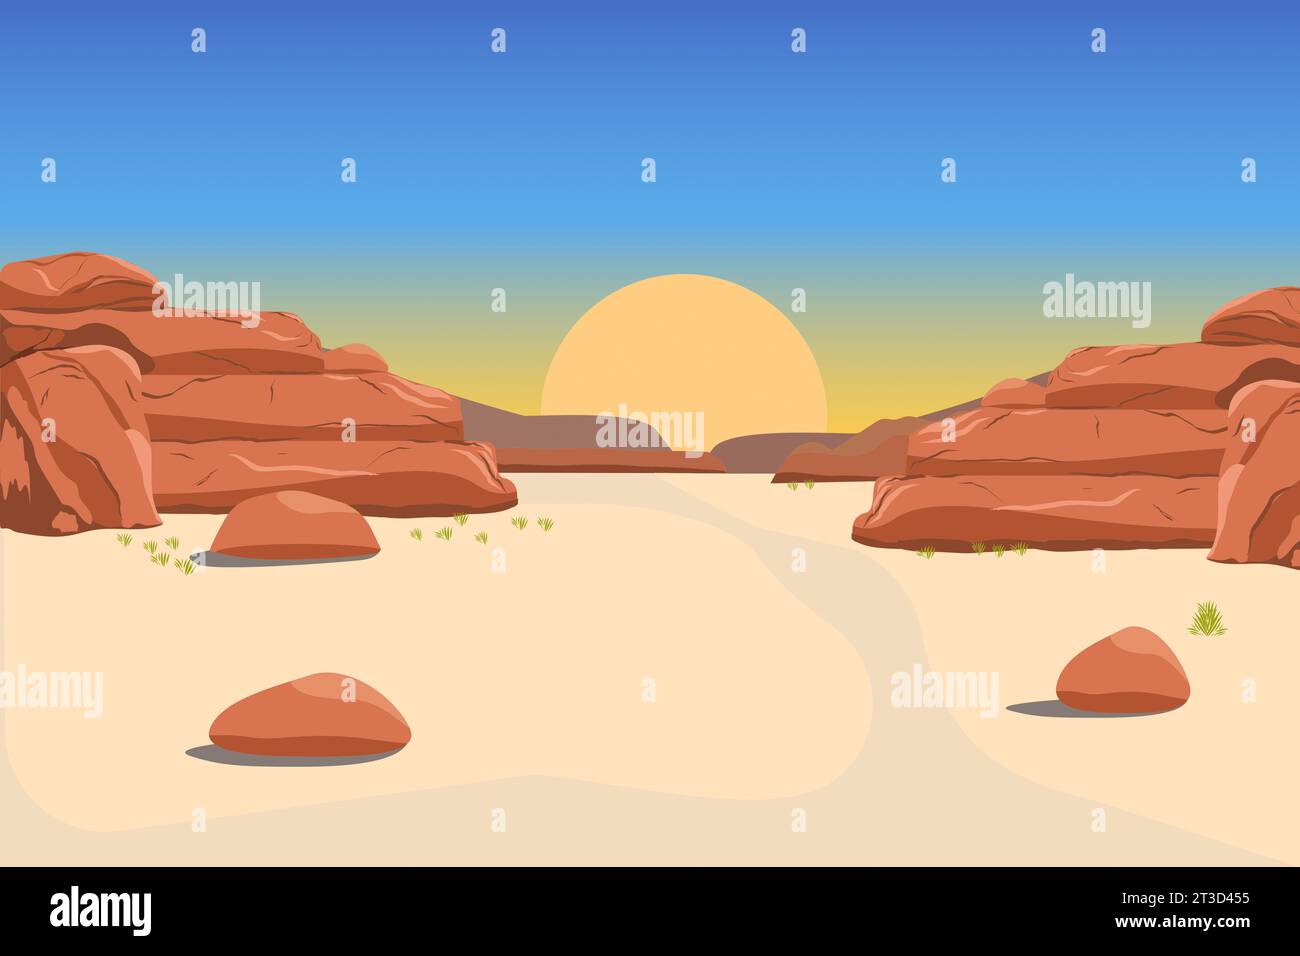 Desert landscape with rock formations and sunset sky - Illustration Stock Photo